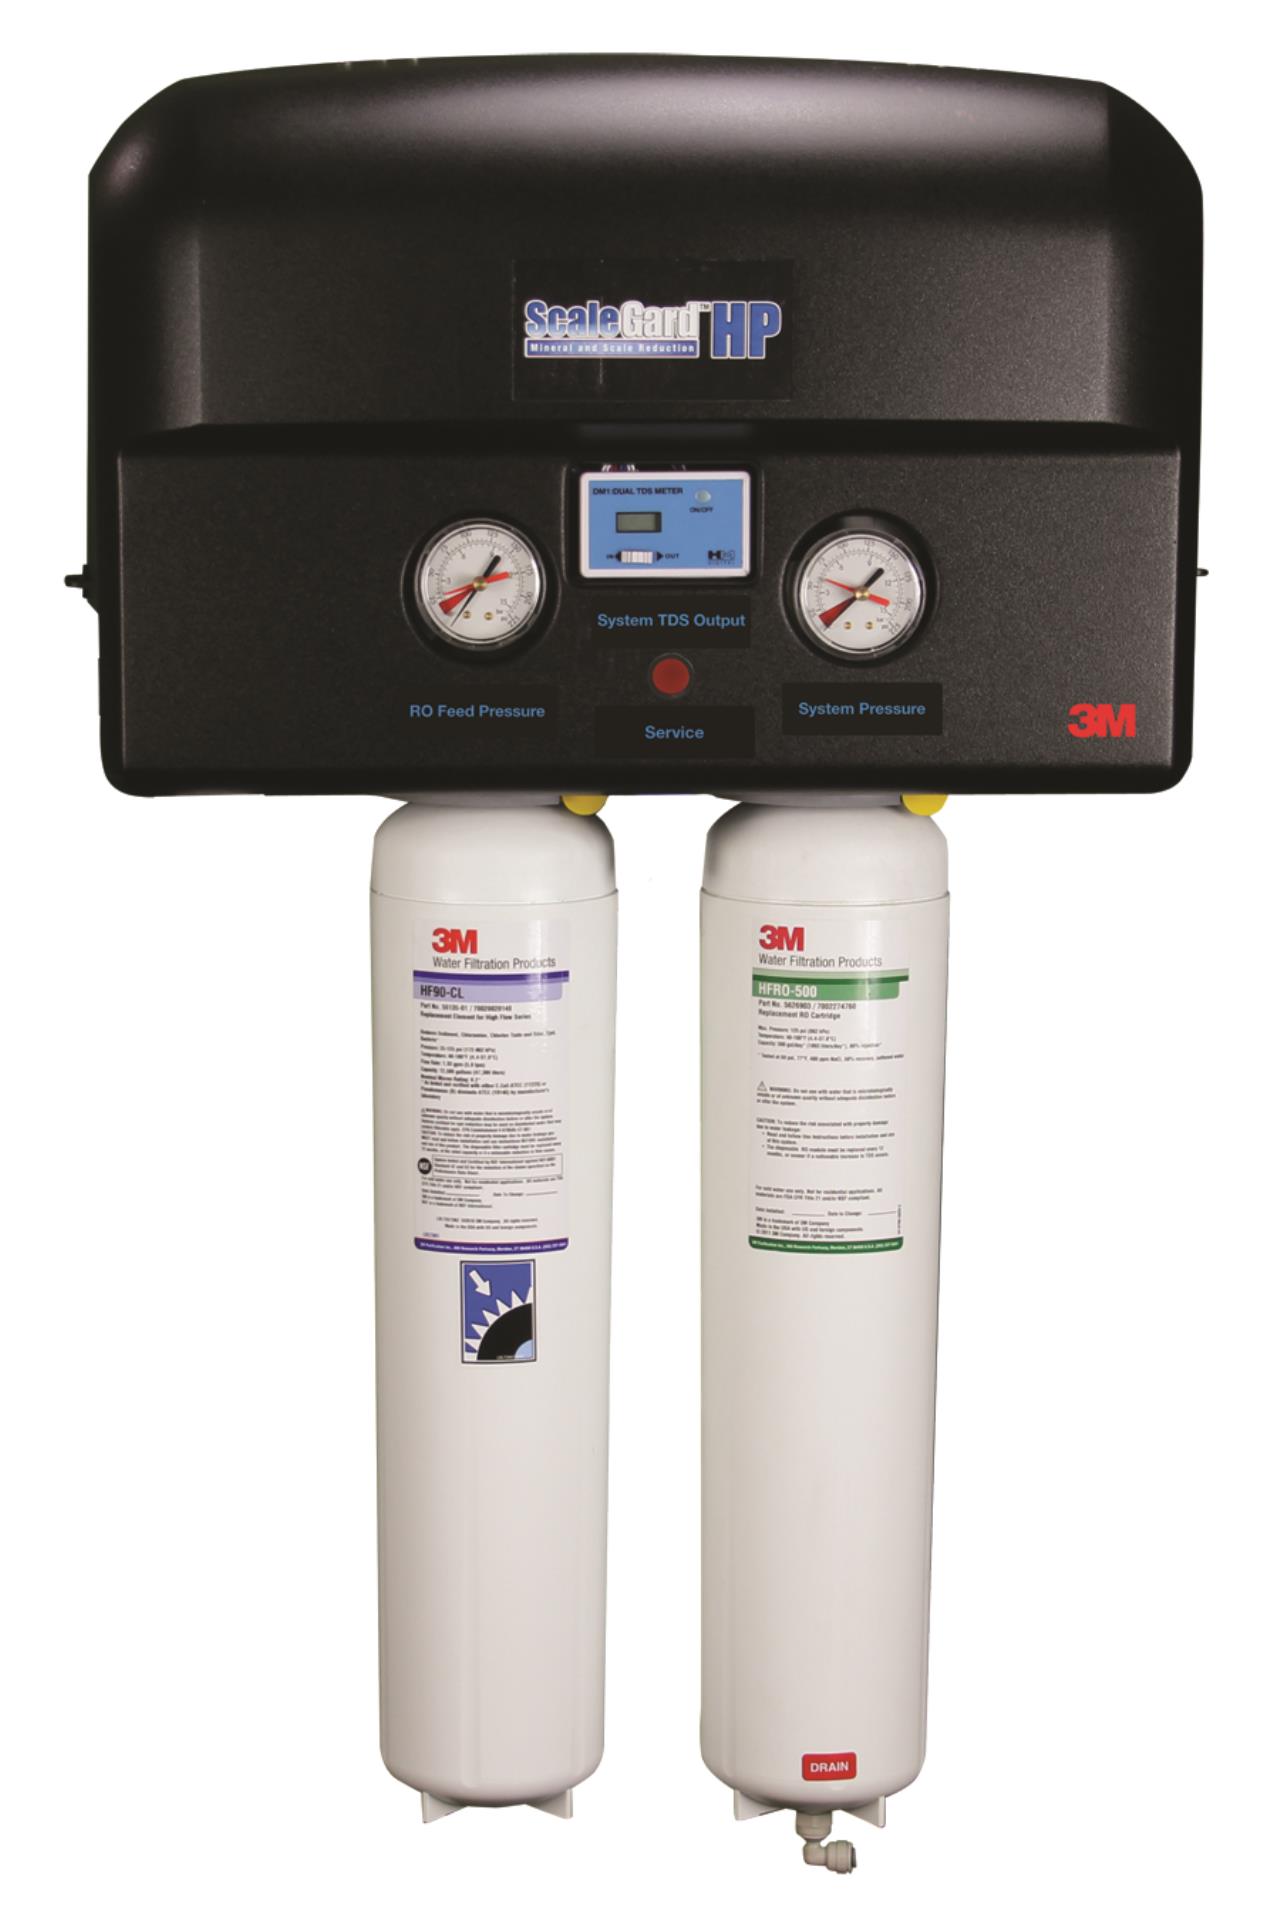 https://www.e-aircraftsupply.com/ItemImages/14/7010340314_3M_ScaleGard_HP_Reverse_Osmosis_System.jpg